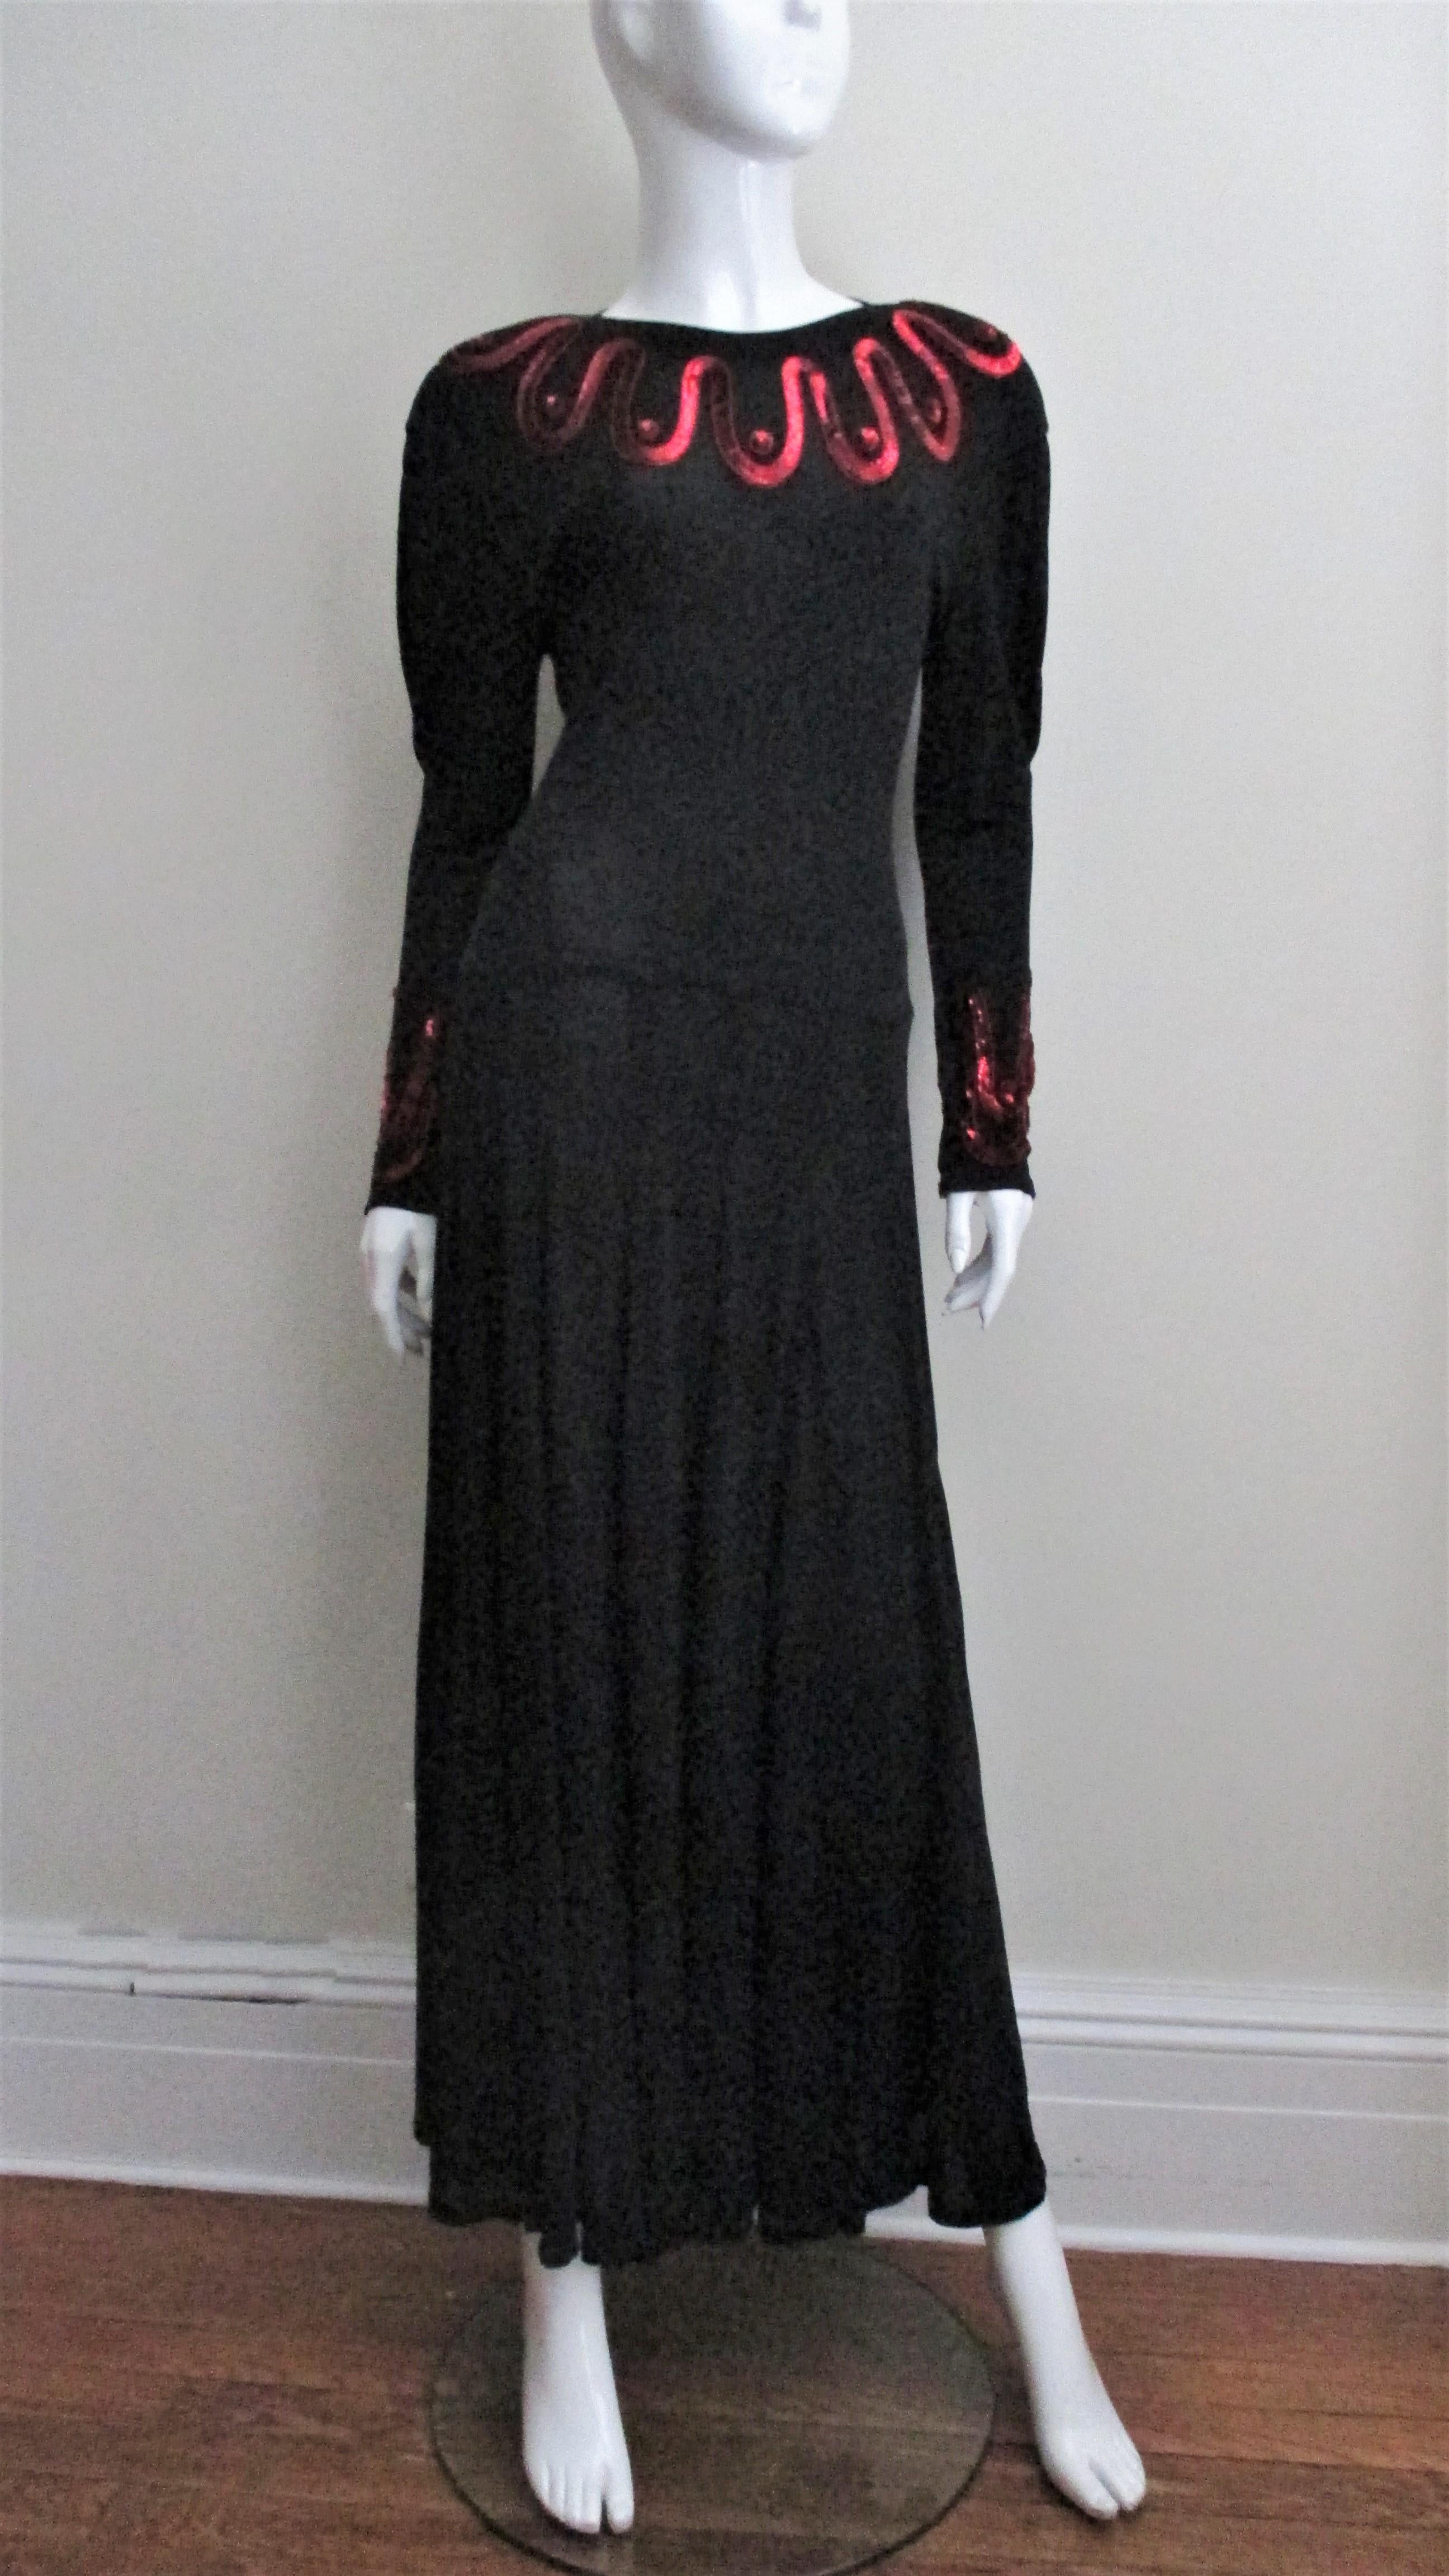 A beautiful rich black silk jersey dress from Jean Muir highlighted with waves of red sequins around the neck and cuffs. It has crew neckline, padded shoulders and subtle dolman sleeves with fullness at the upper arm. The skirt is comprised of 12